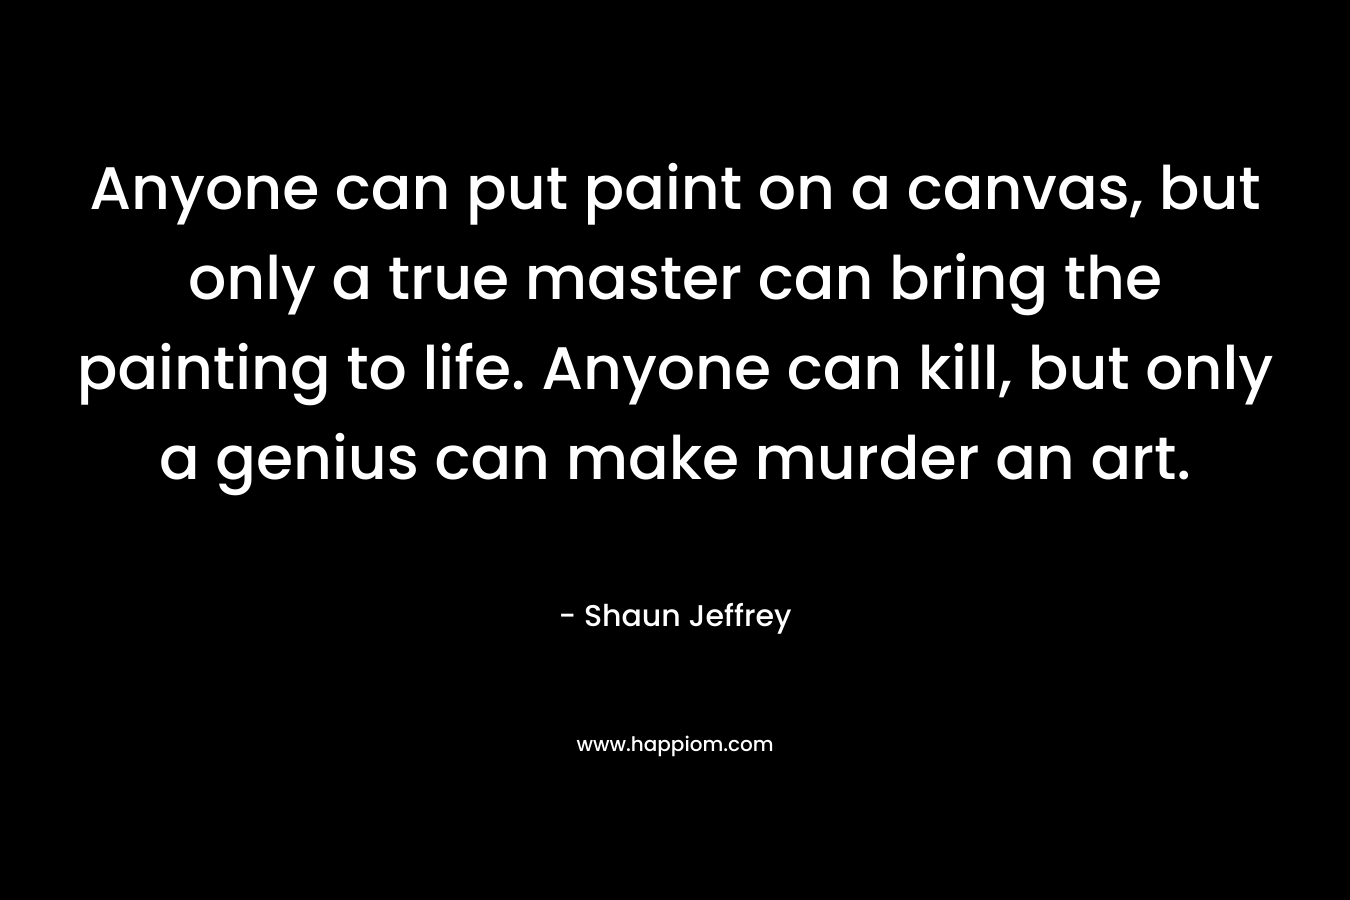 Anyone can put paint on a canvas, but only a true master can bring the painting to life. Anyone can kill, but only a genius can make murder an art.